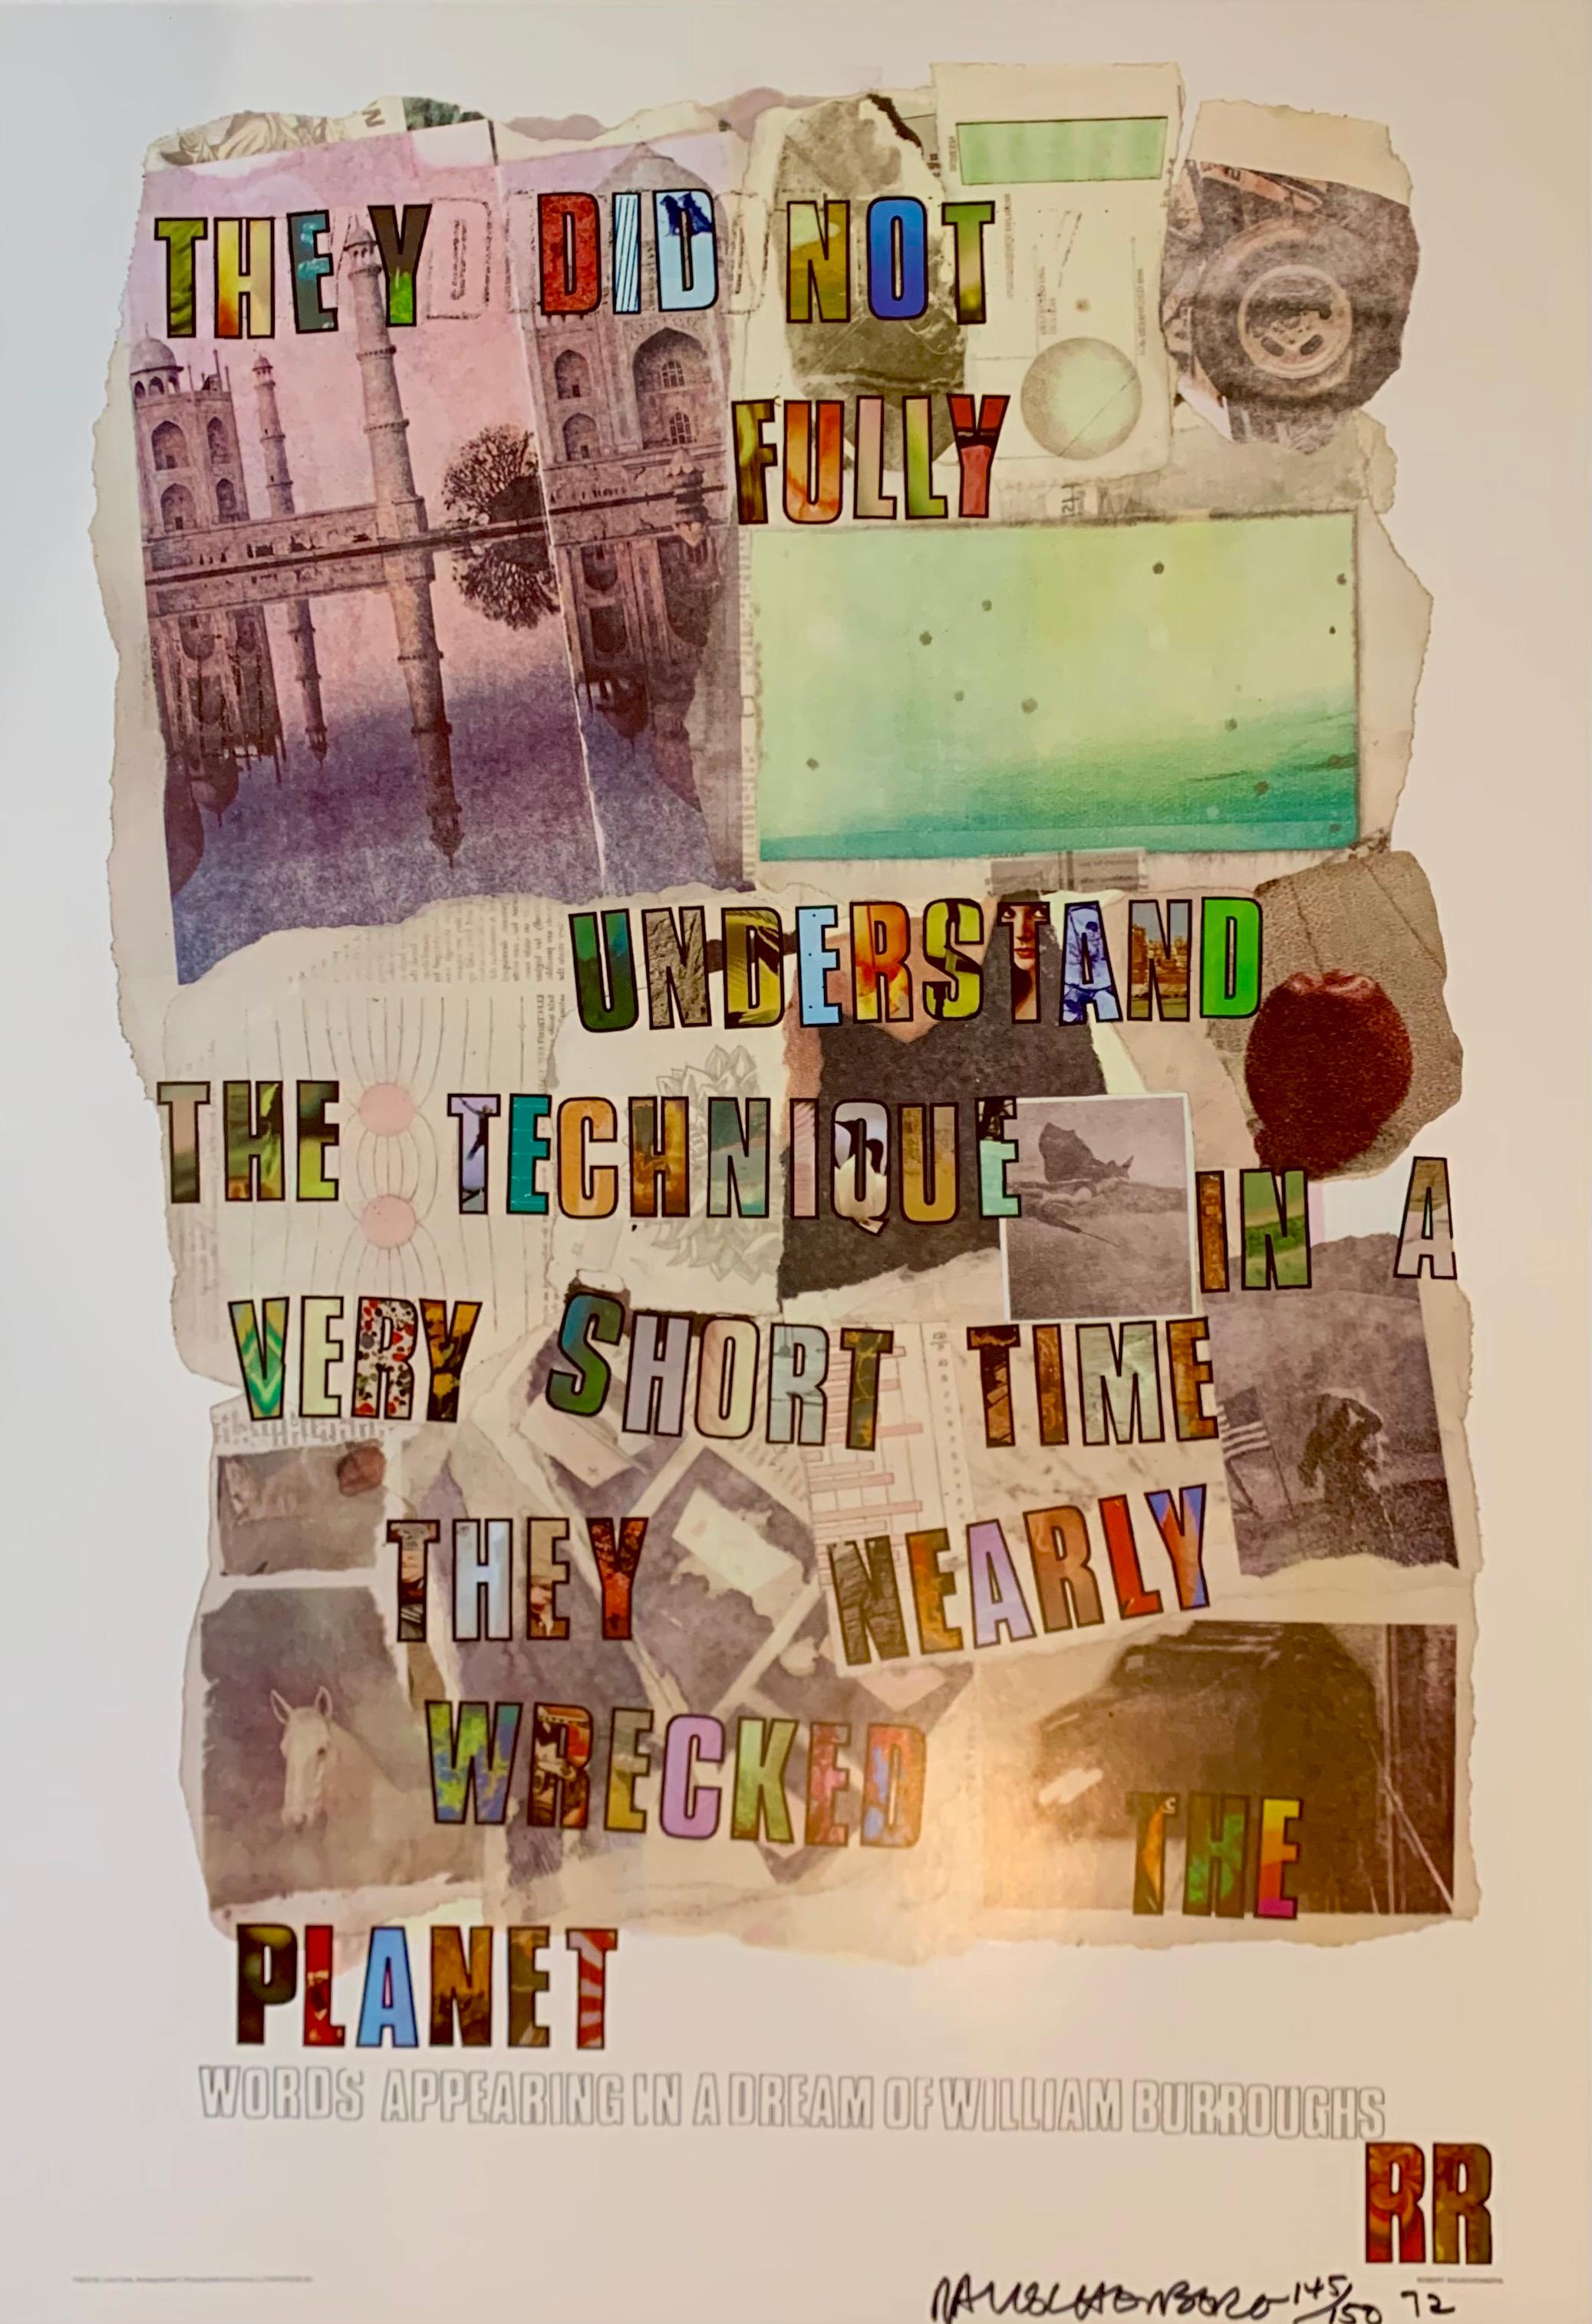 Dream of William Burroughs Signed Poster - Print by Robert Rauschenberg